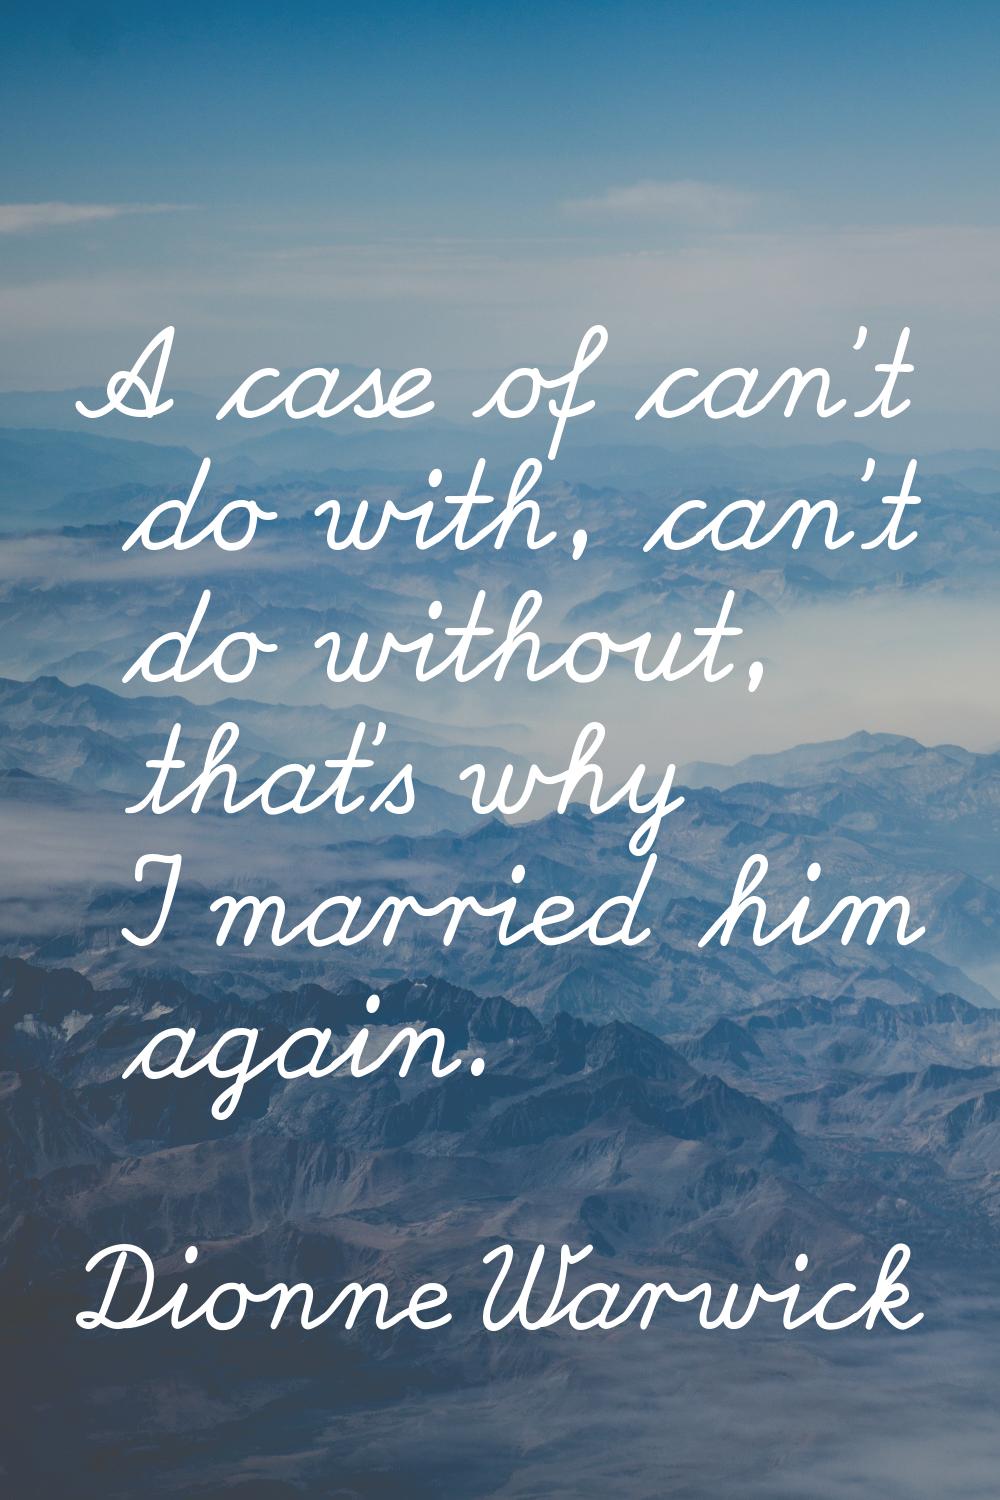 A case of can't do with, can't do without, that's why I married him again.